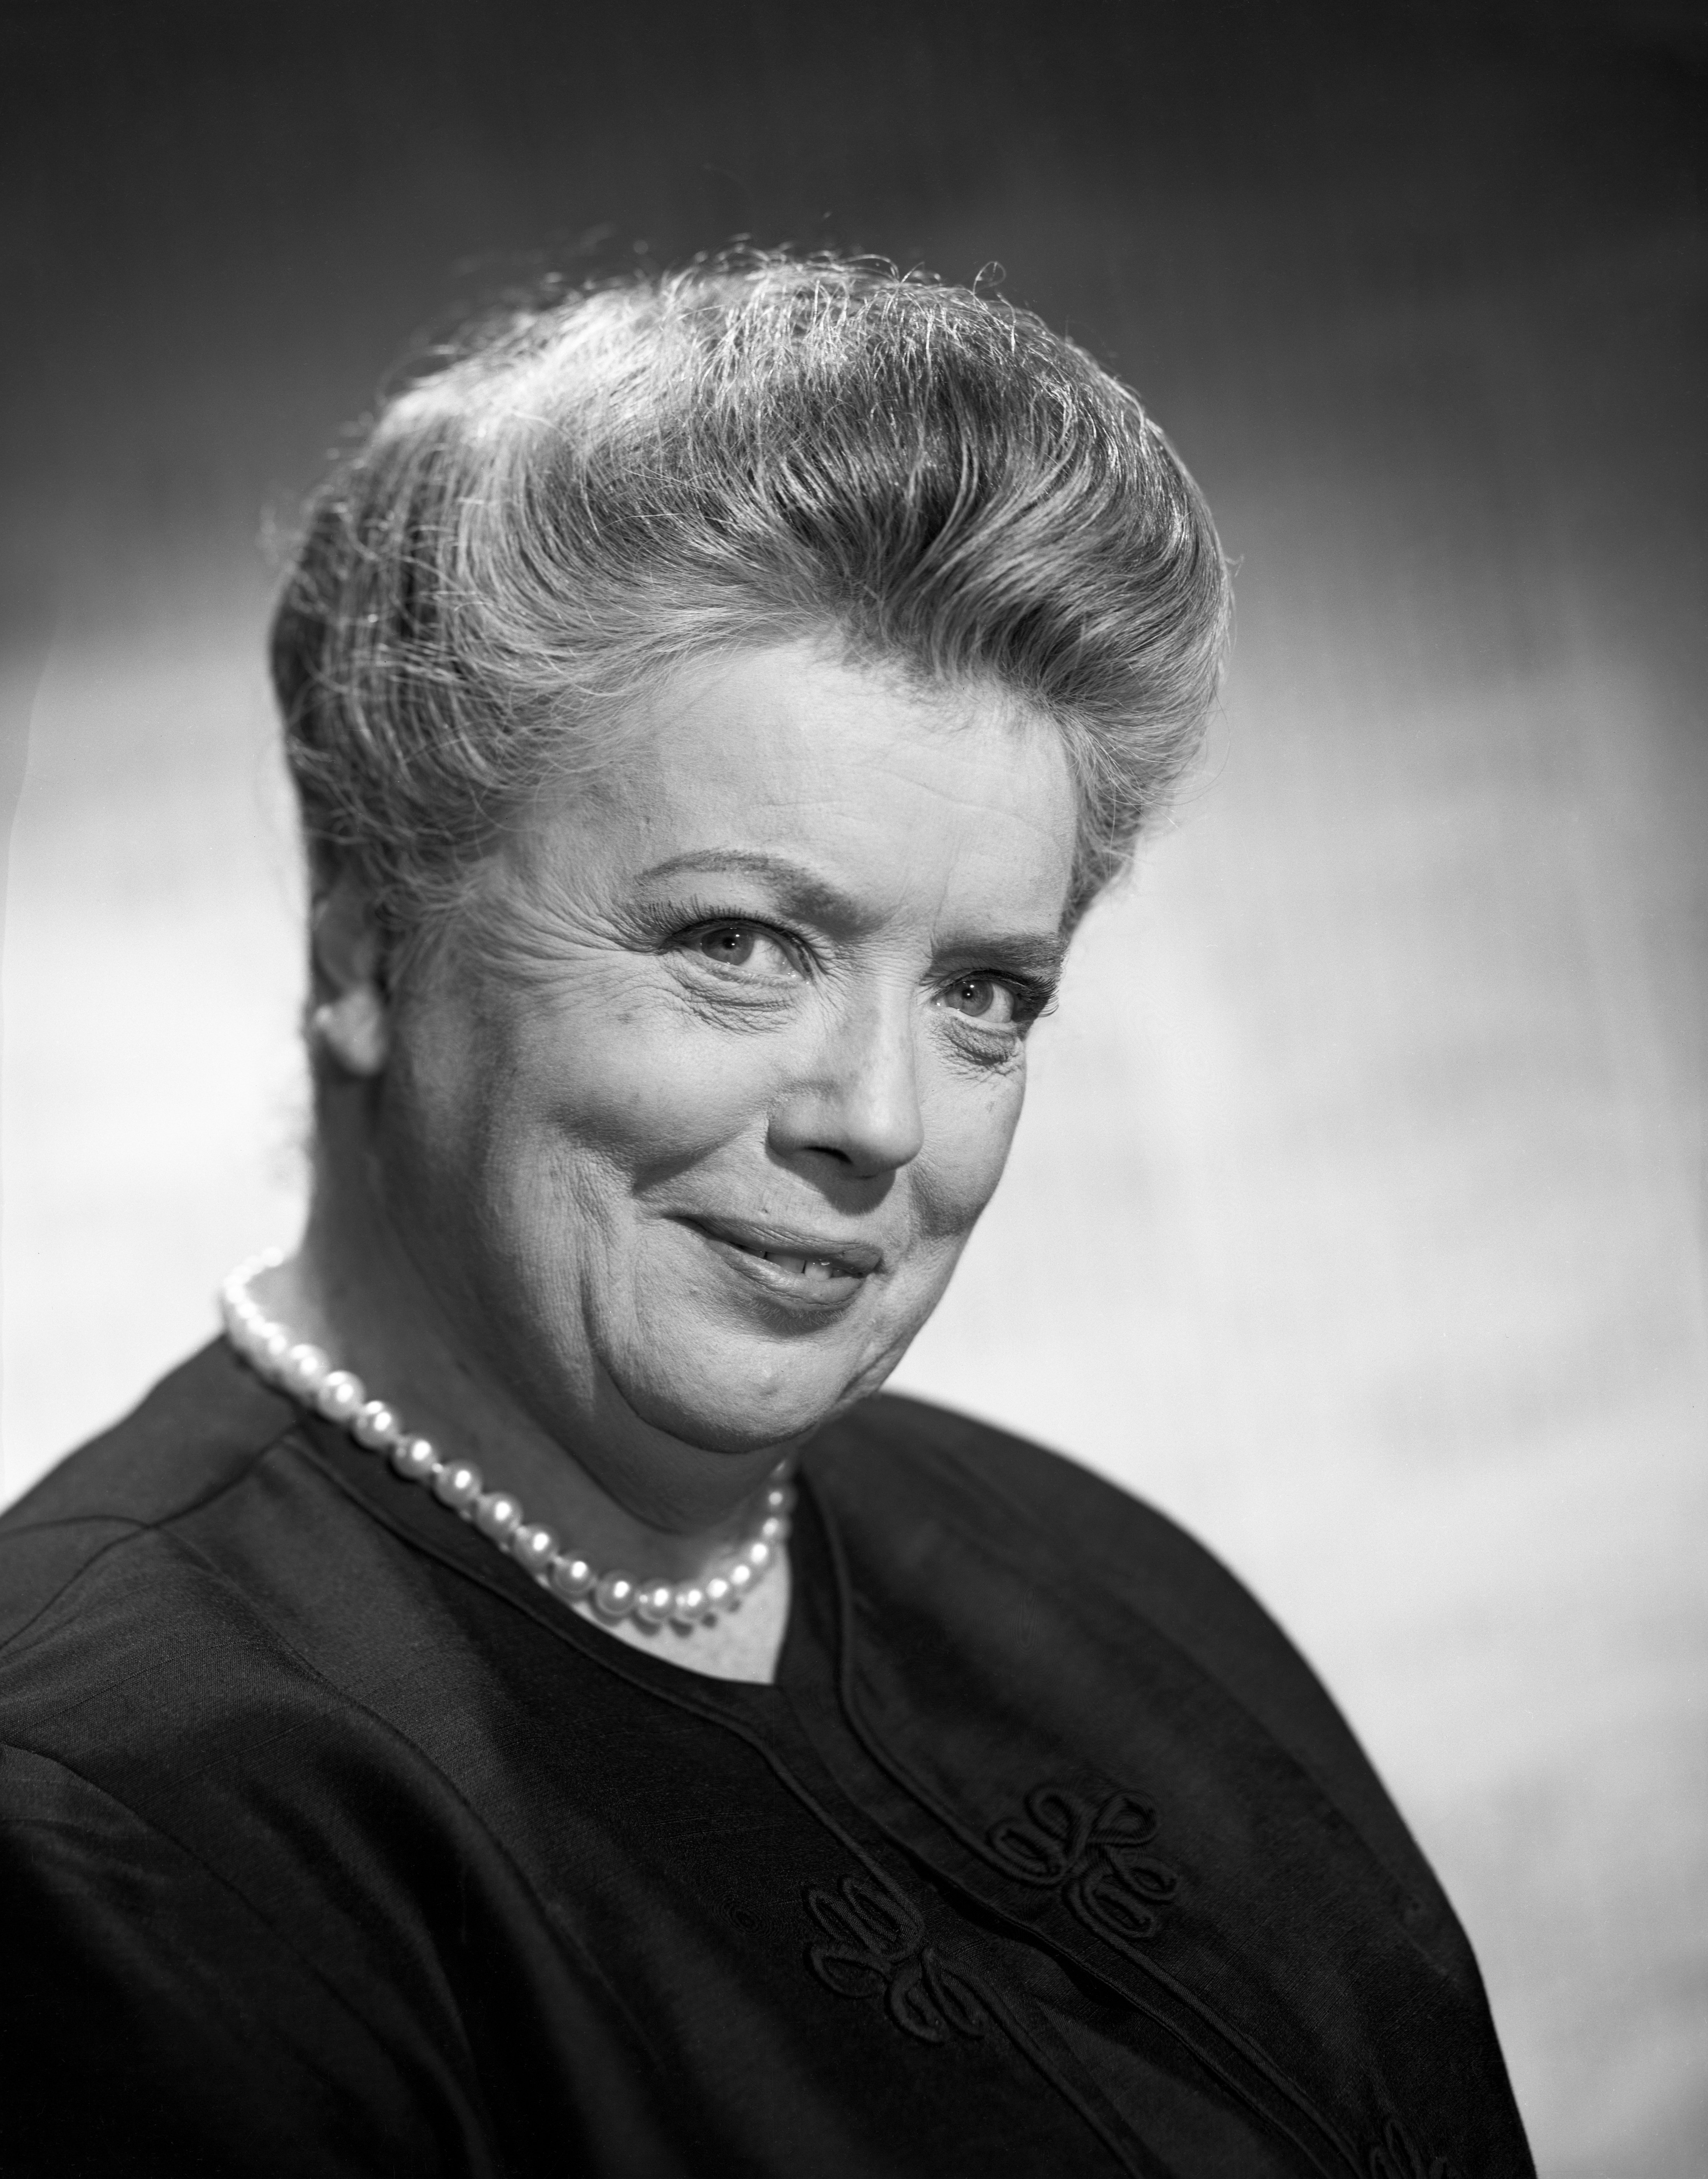 Frances Bavier as Aunt Bee on "The Andy Griffith Show" | Photo: CBS via Getty Images